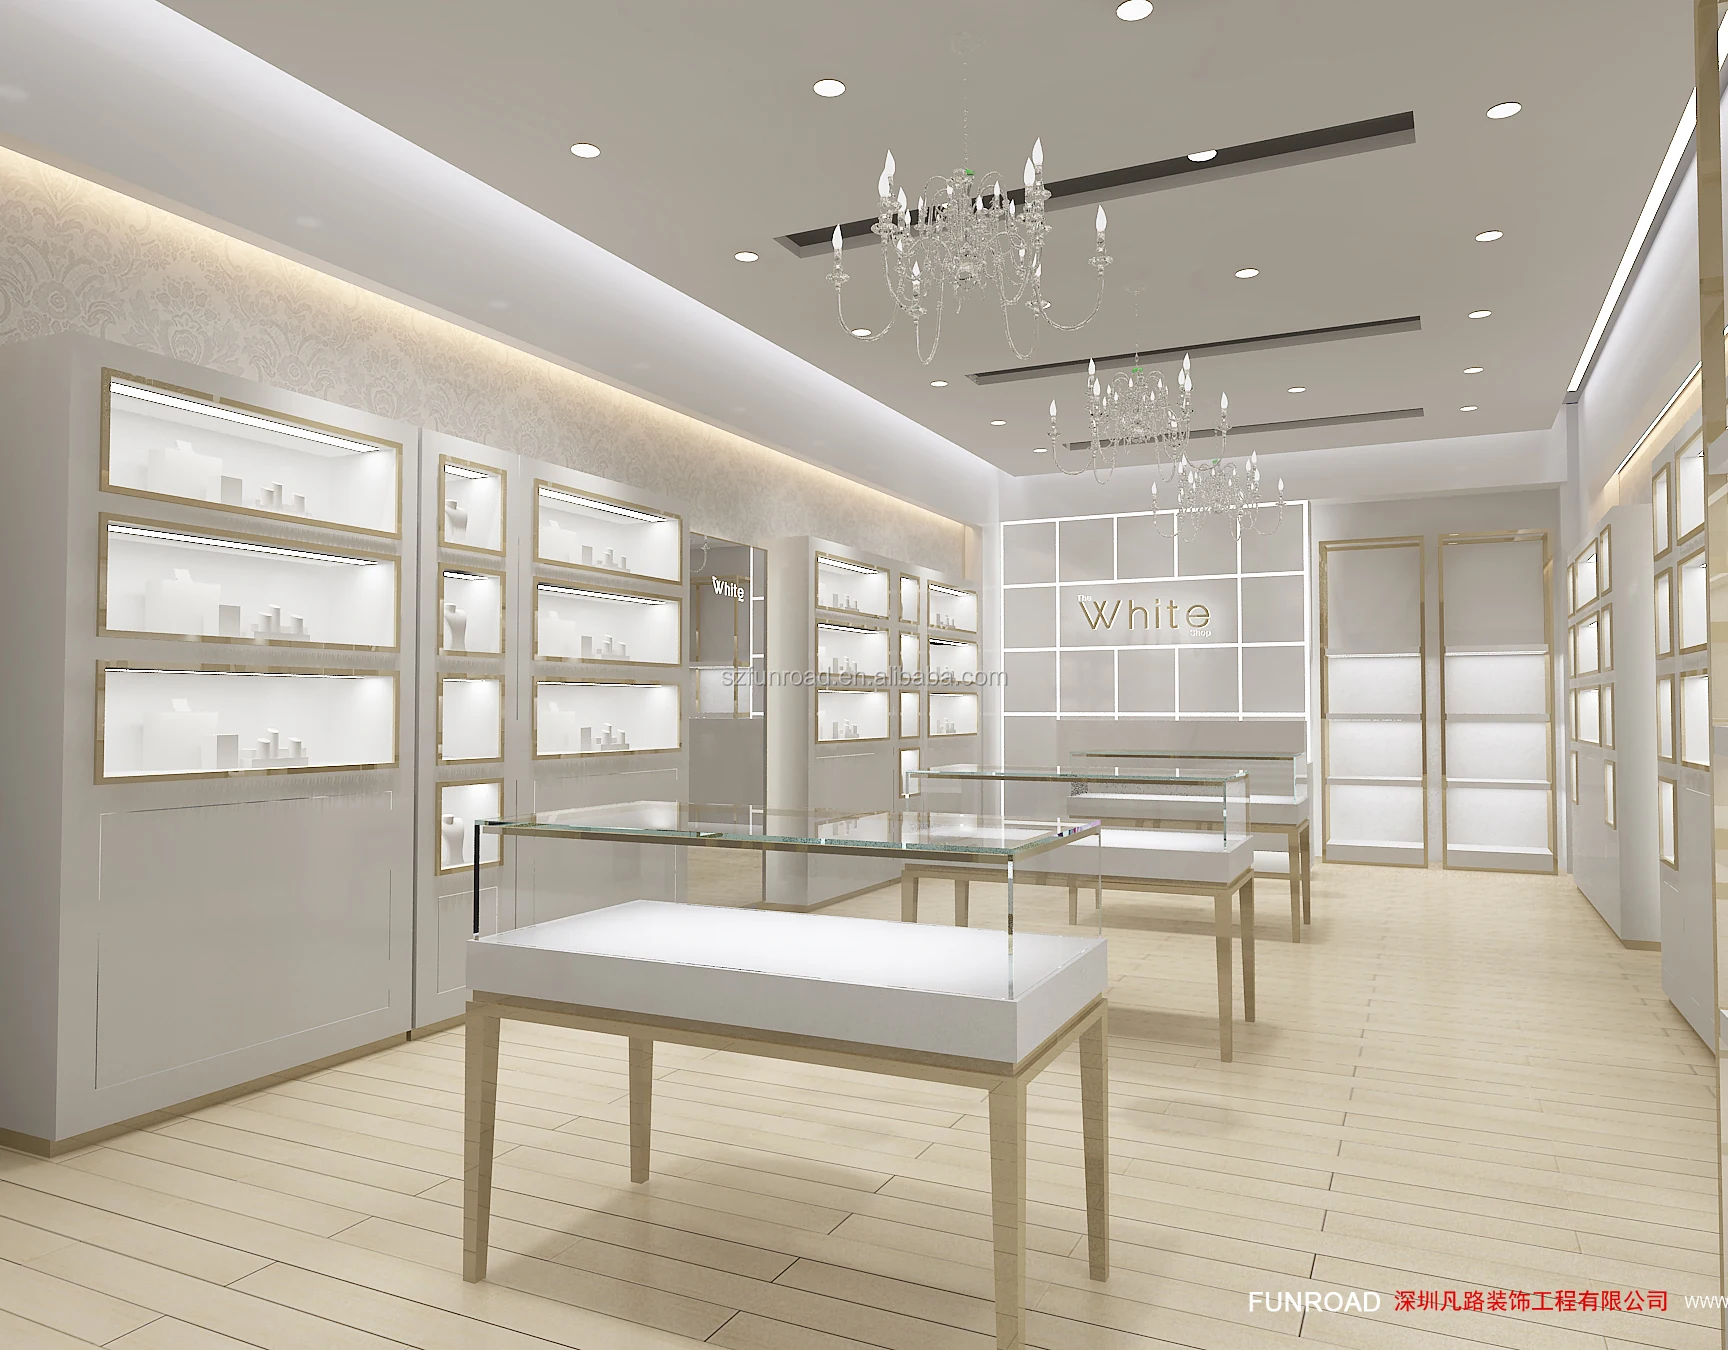 New Style High End Jewelry Display Cabinet Jewelry Shop Counter Design For Store Decoration